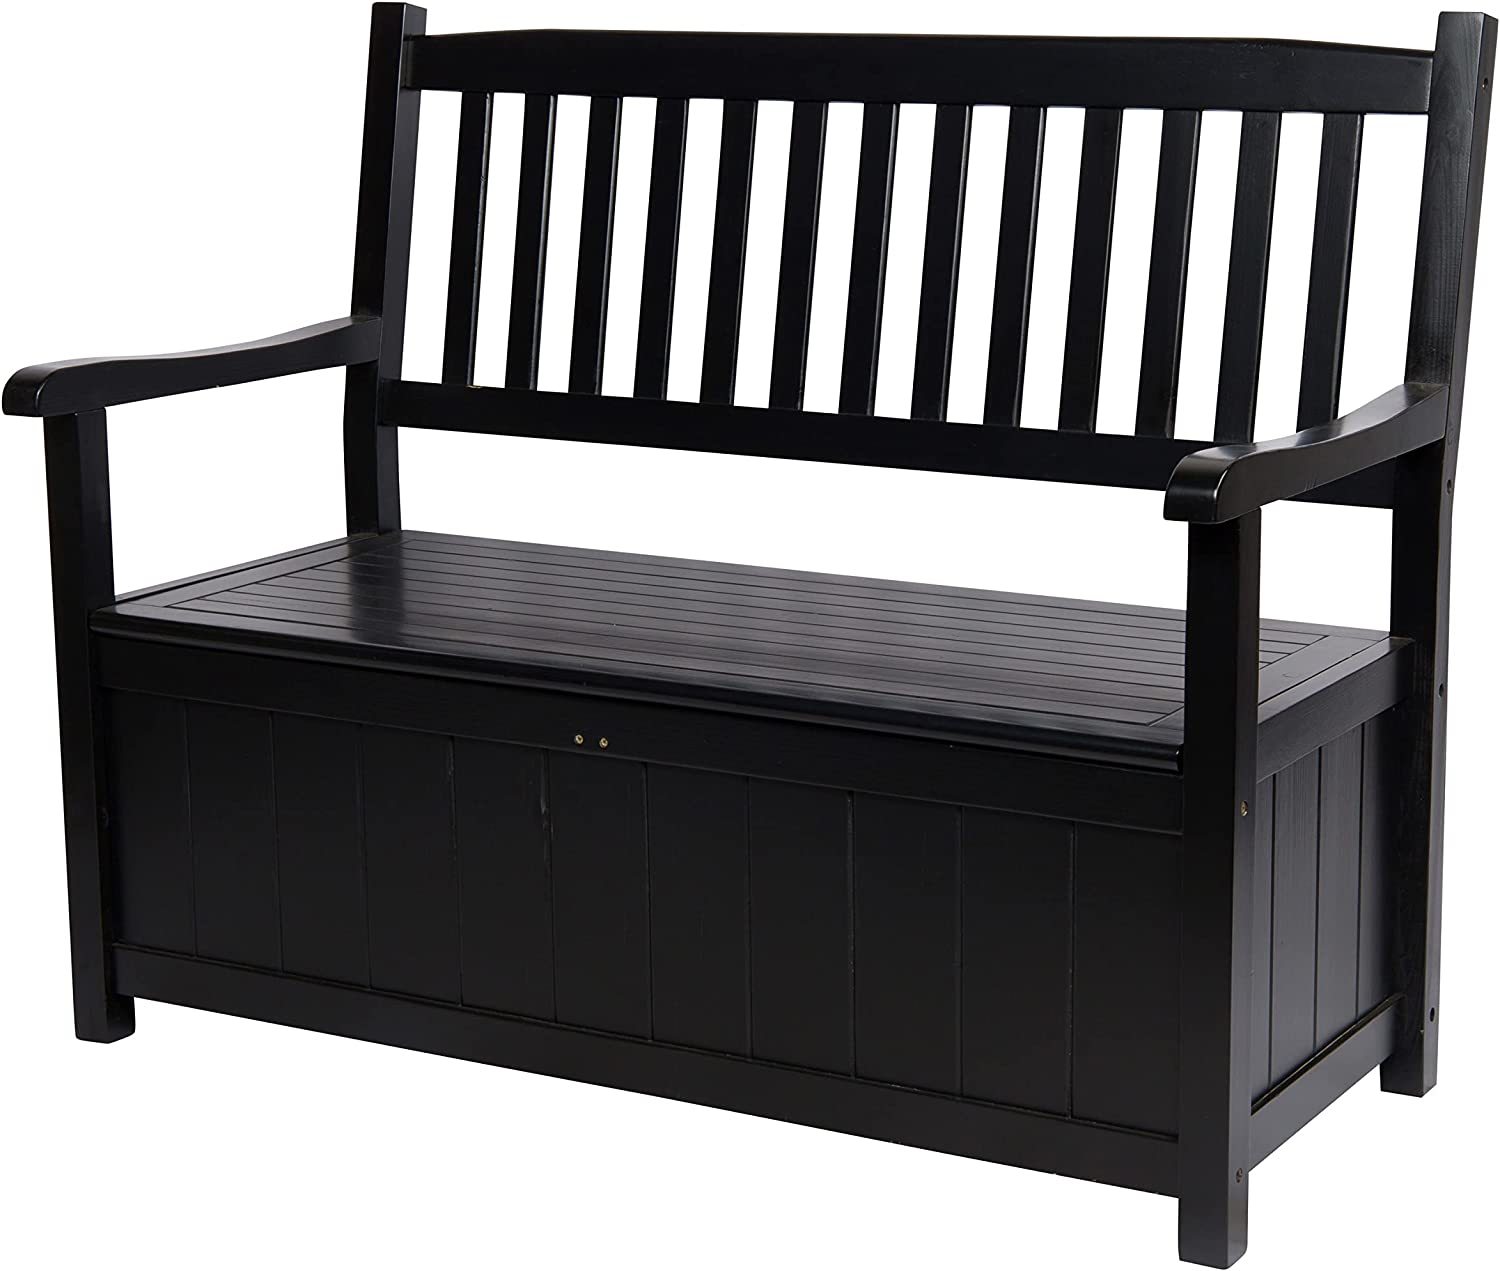 48-Inch Indoor/Outdoor Wooden Storage Bench, Ashton, By Shine Company, 4219Bk. - $237.96